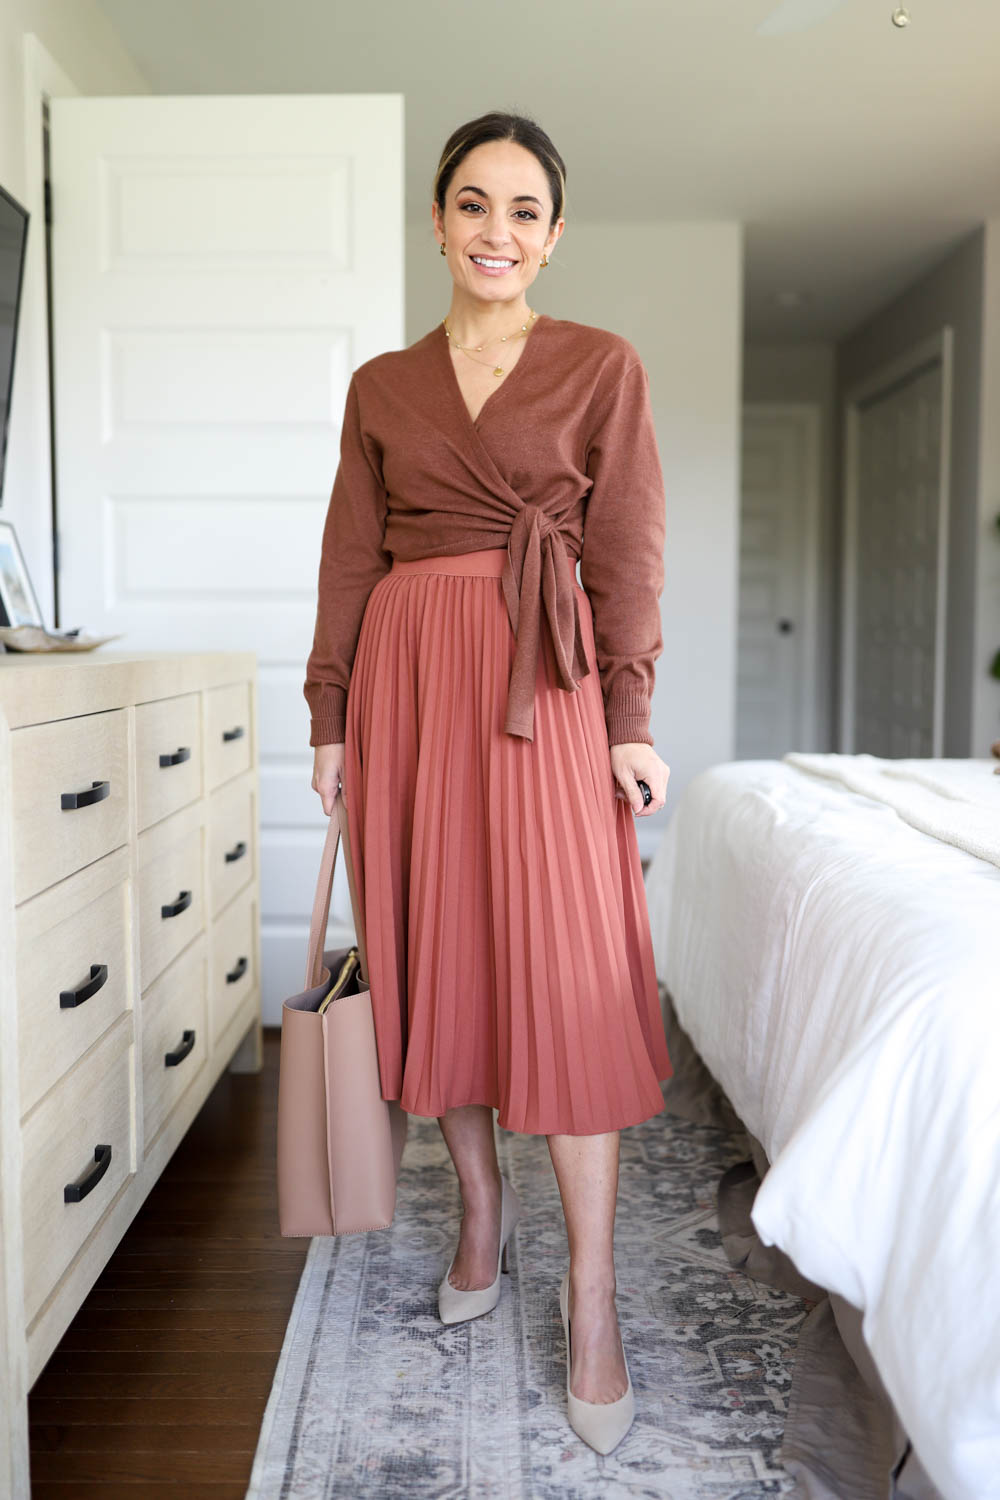 Neutral outfit idea for work via pumps and push-ups blog | pleated skirt outfit | petite friendly fashion | business casual outfits 